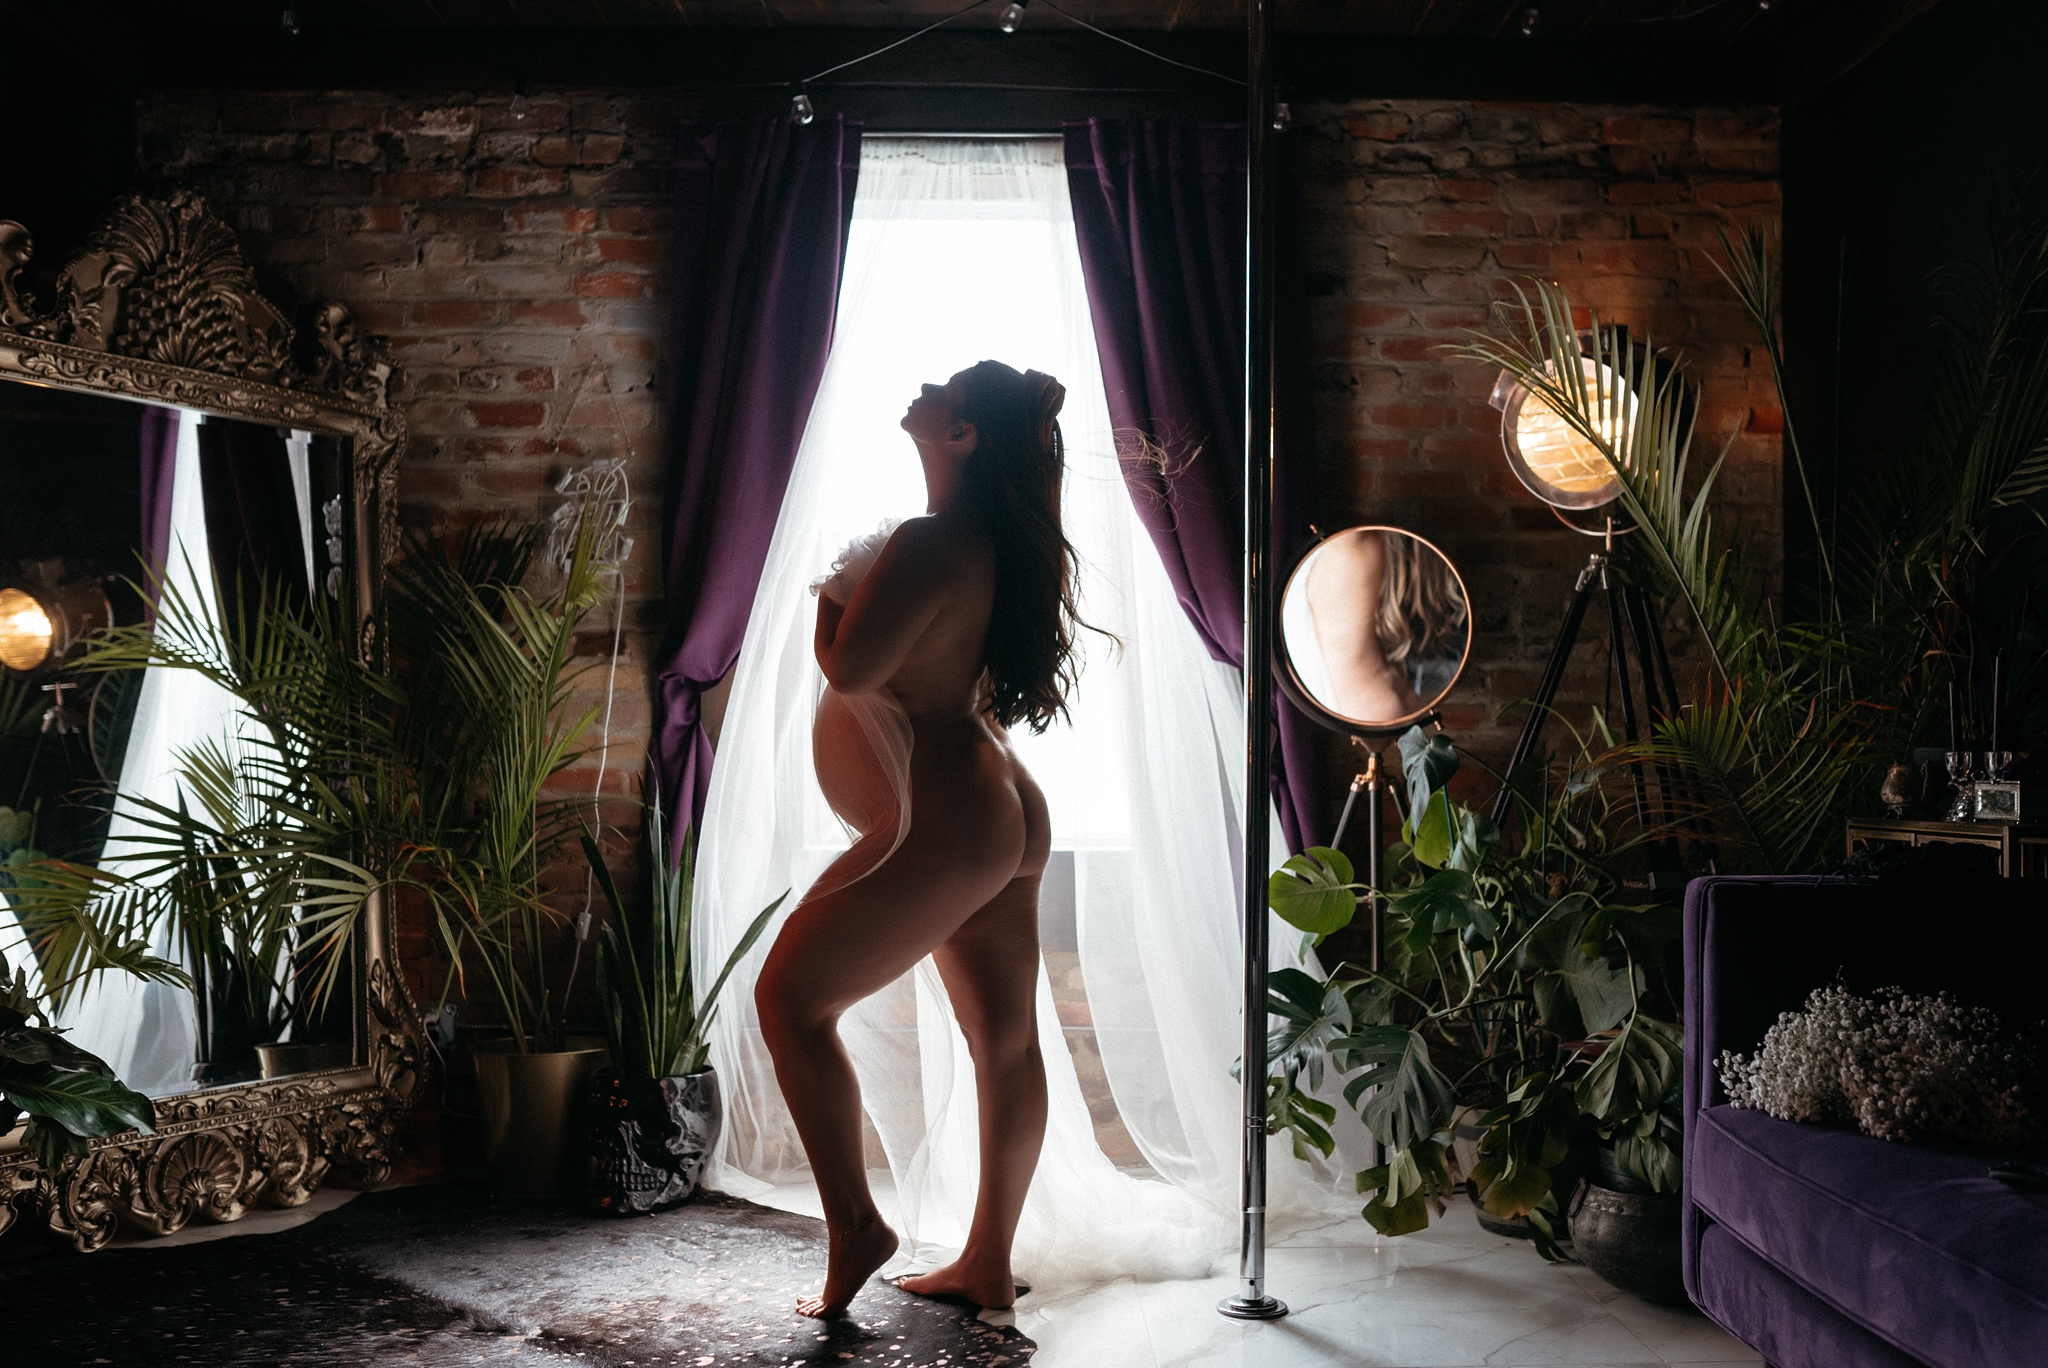 Maternity Boudoir Image of woman with silhouette